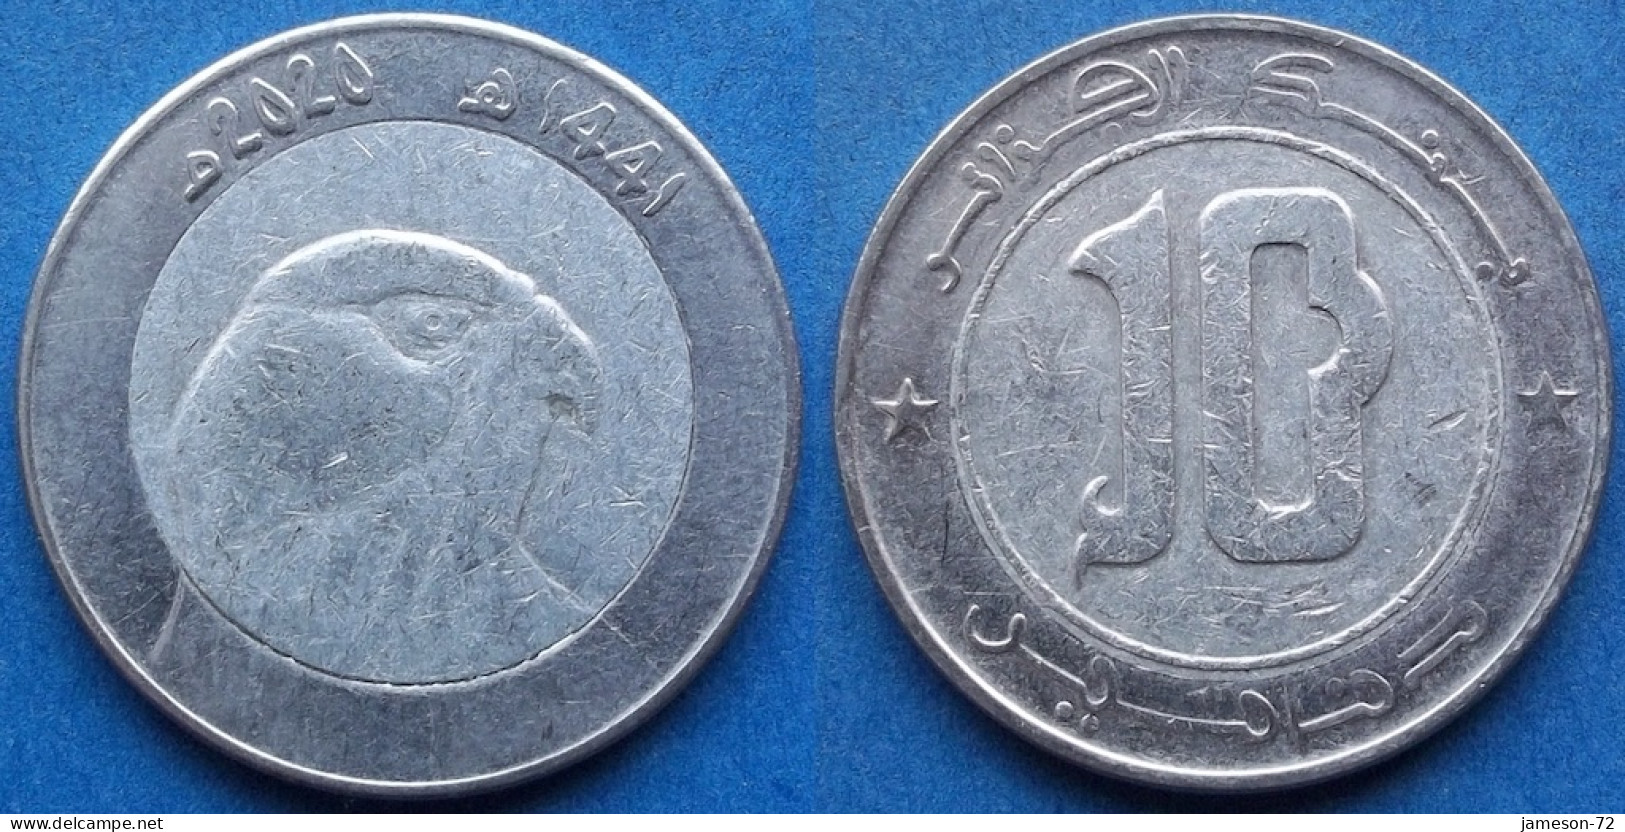 ALGERIA - 10 Dinars AH1441 2020AD "Barbary Falcon" KM# 124 Independent (1962) - Edelweiss Coins - Algérie